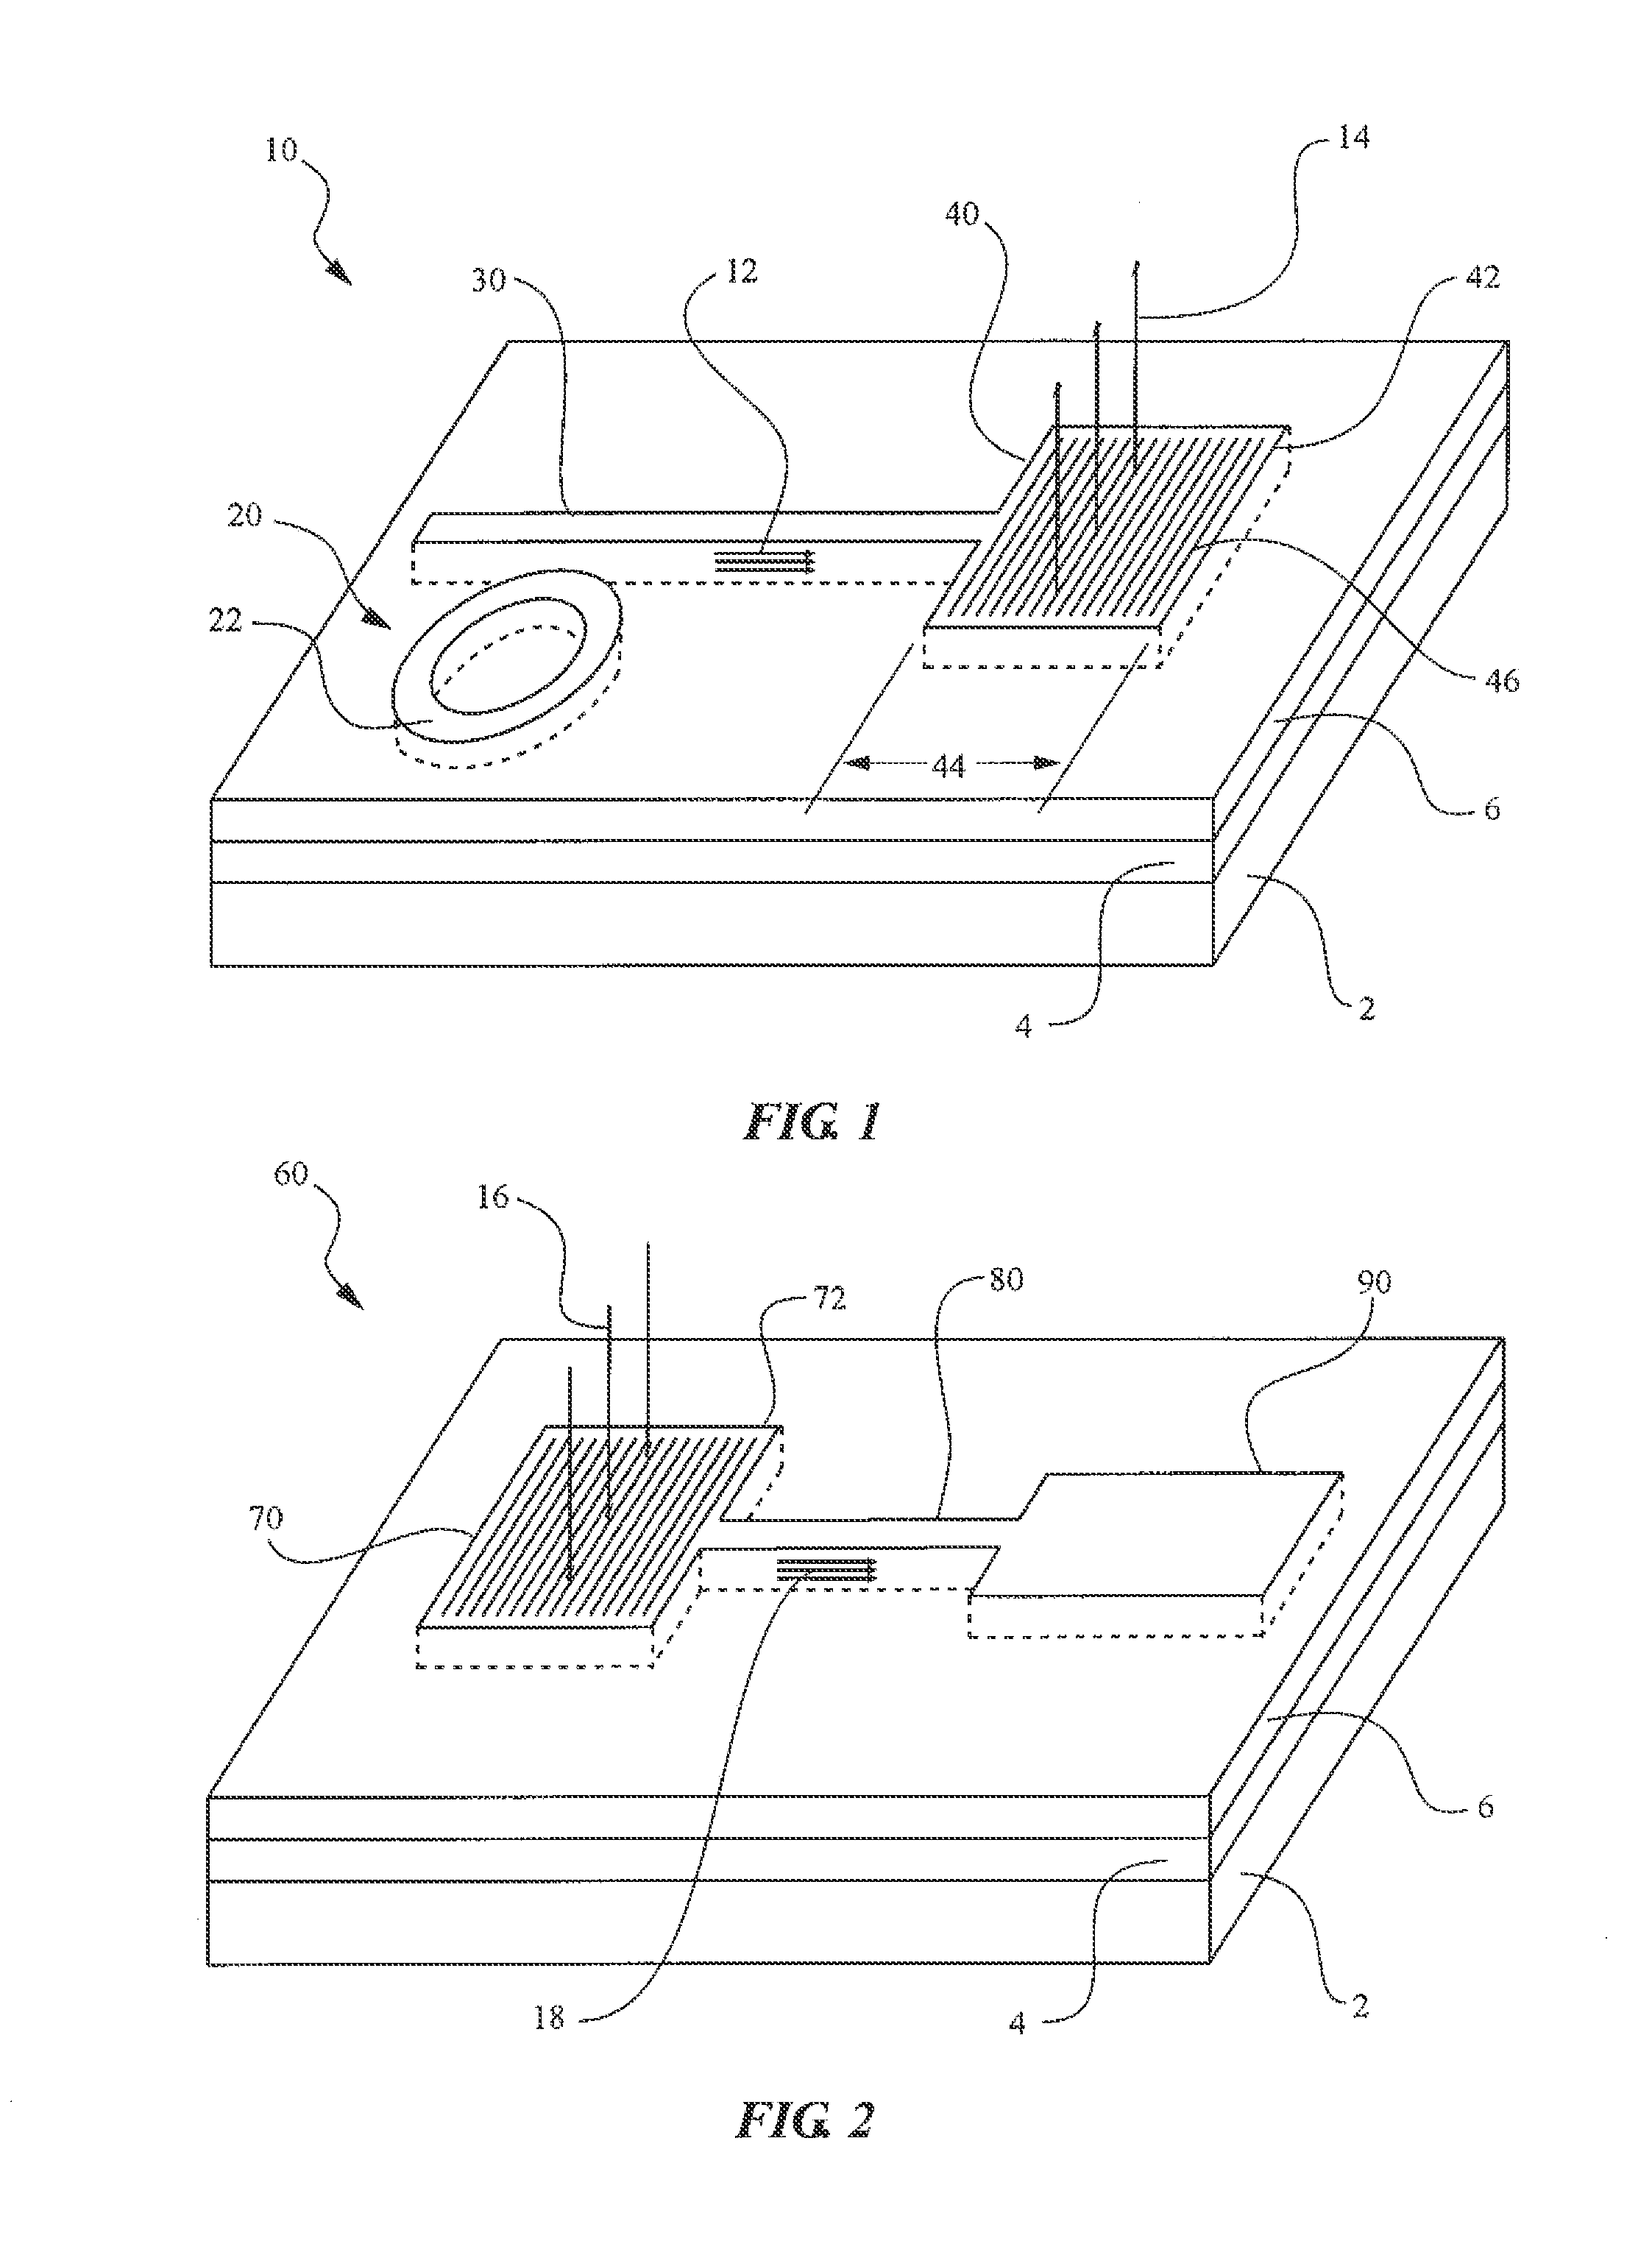 Optical engine for point-to-point communications